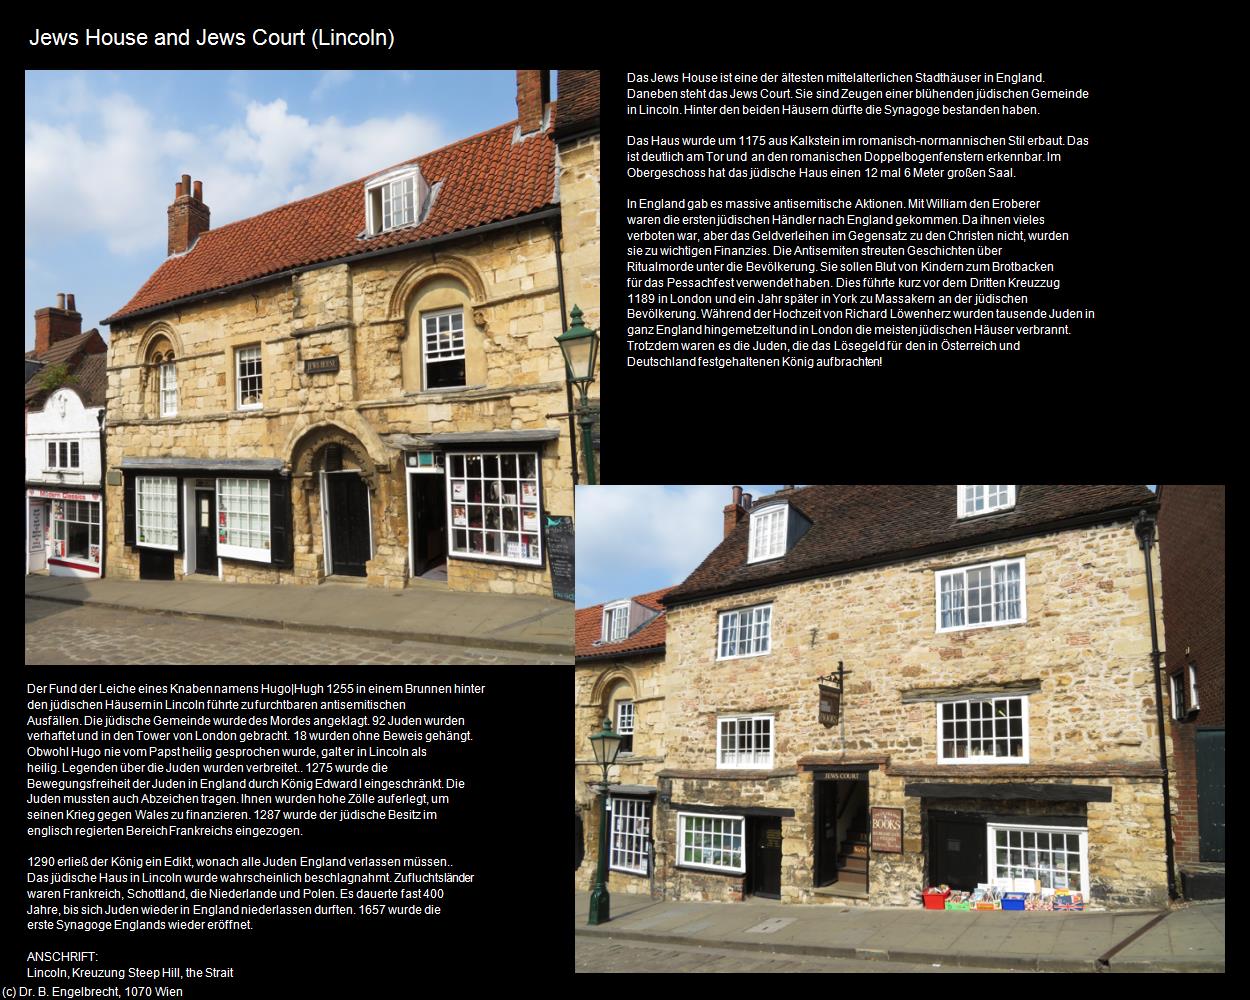 Jews House and Jews Court  (Lincoln, England) in Kulturatlas-ENGLAND und WALES